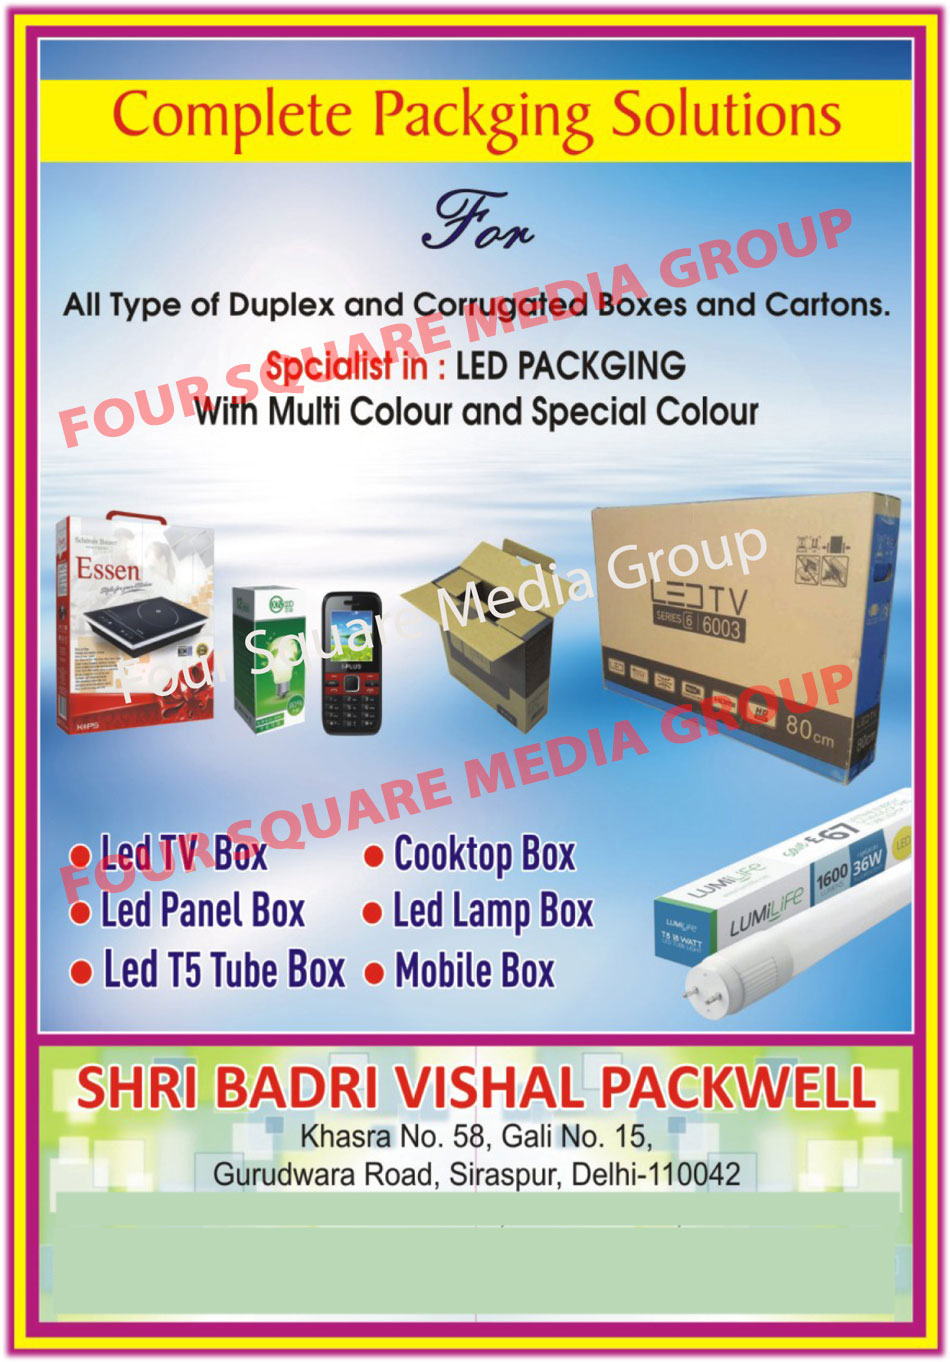 Packaging Solution, Duplex Box, Corrugated Box, Cartons, Led Packaging with Multi Colour and Special Colour, Led TV Box, Led Panel Box, Led T5 Tube Box, Cooktop Box, Led Lamp Box, Mobile Box